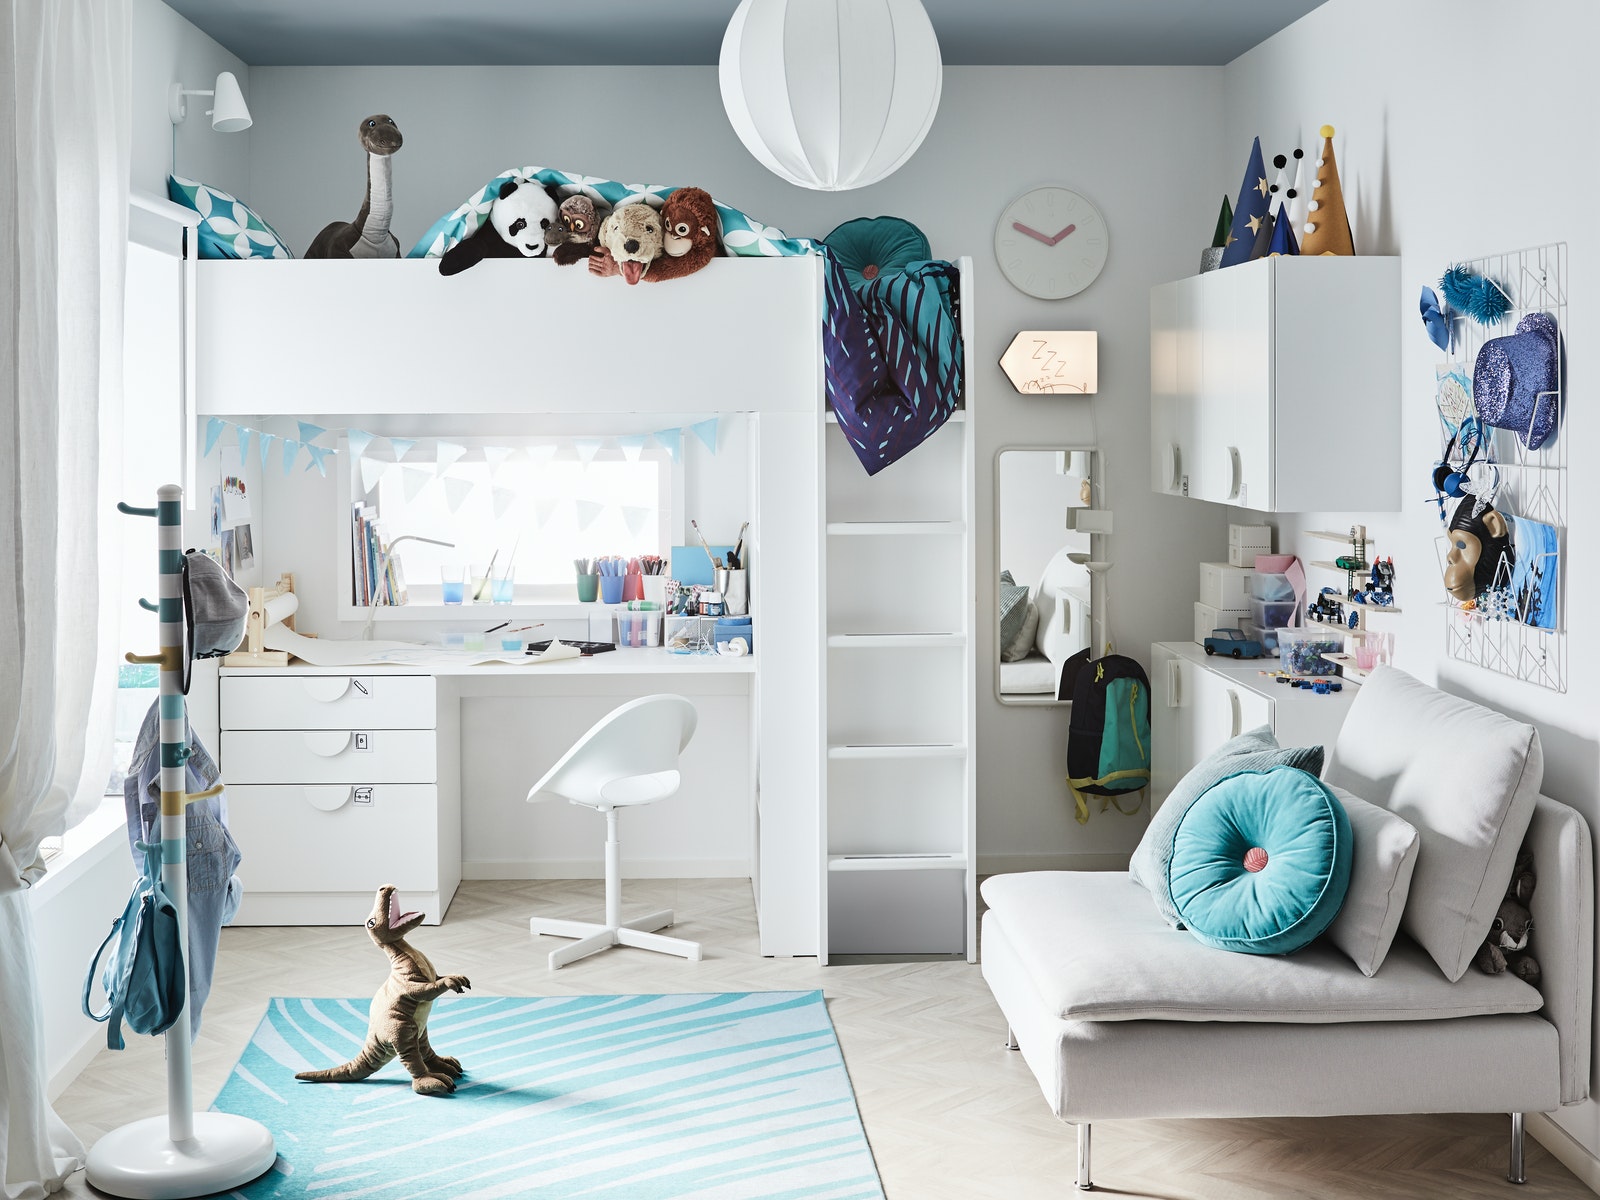 IKEA - A small children’s bedroom with plenty of personality